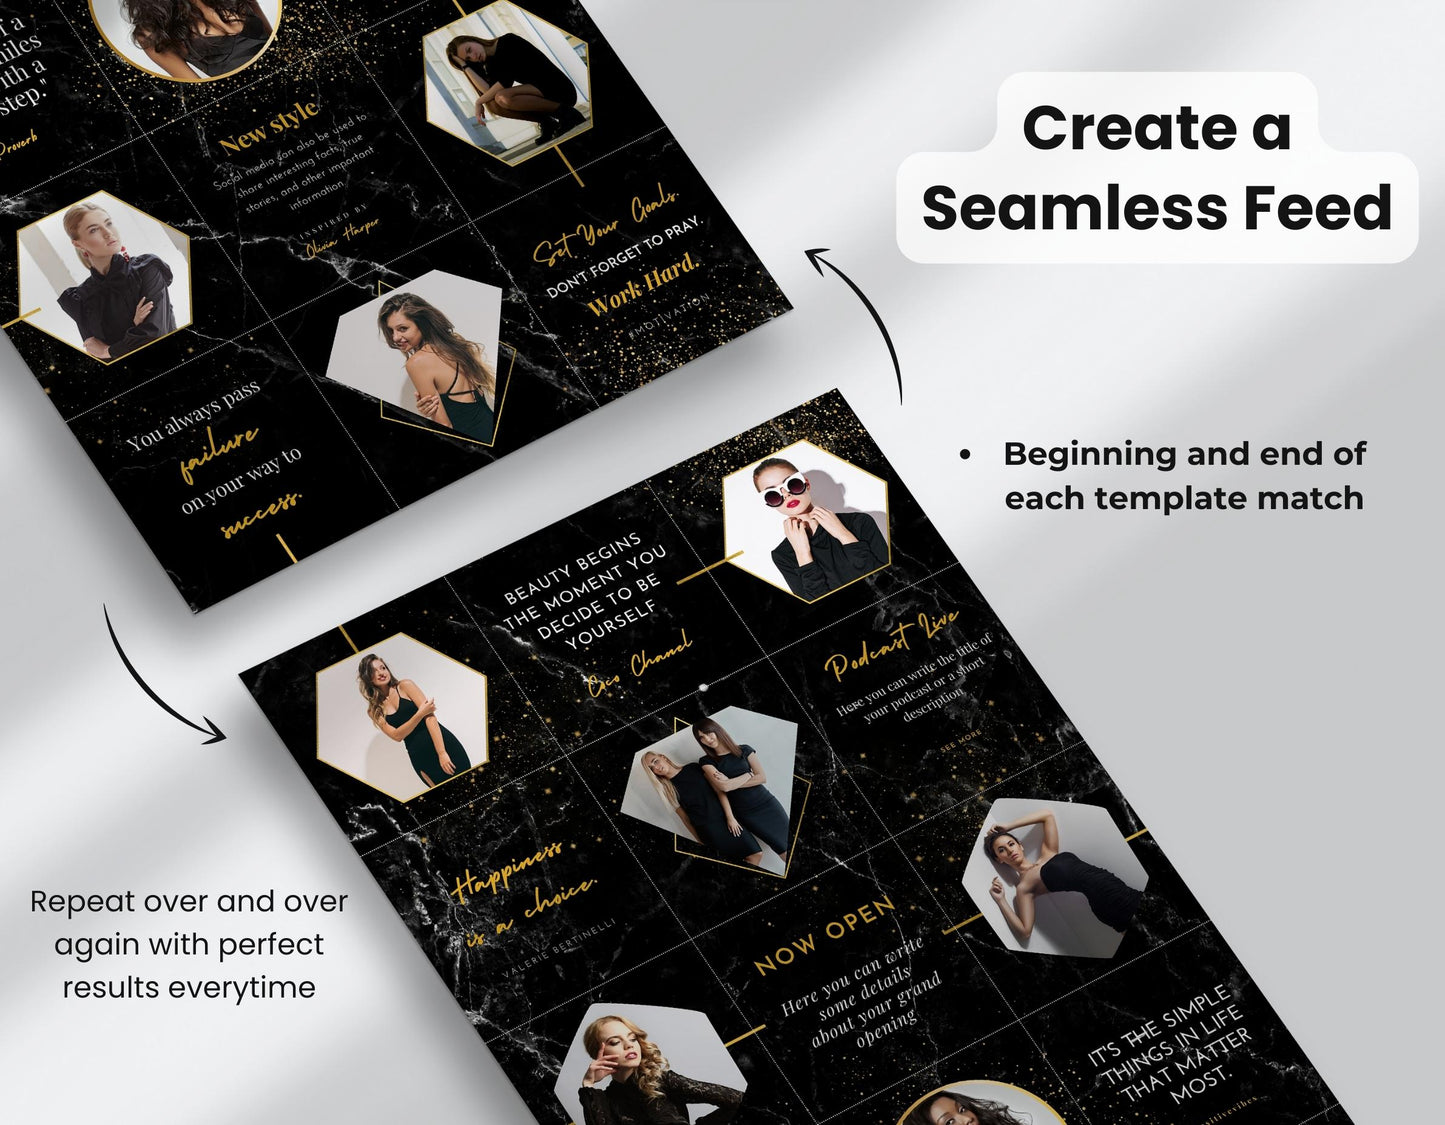 Black & Gold Instagram Puzzle Template DigiPax